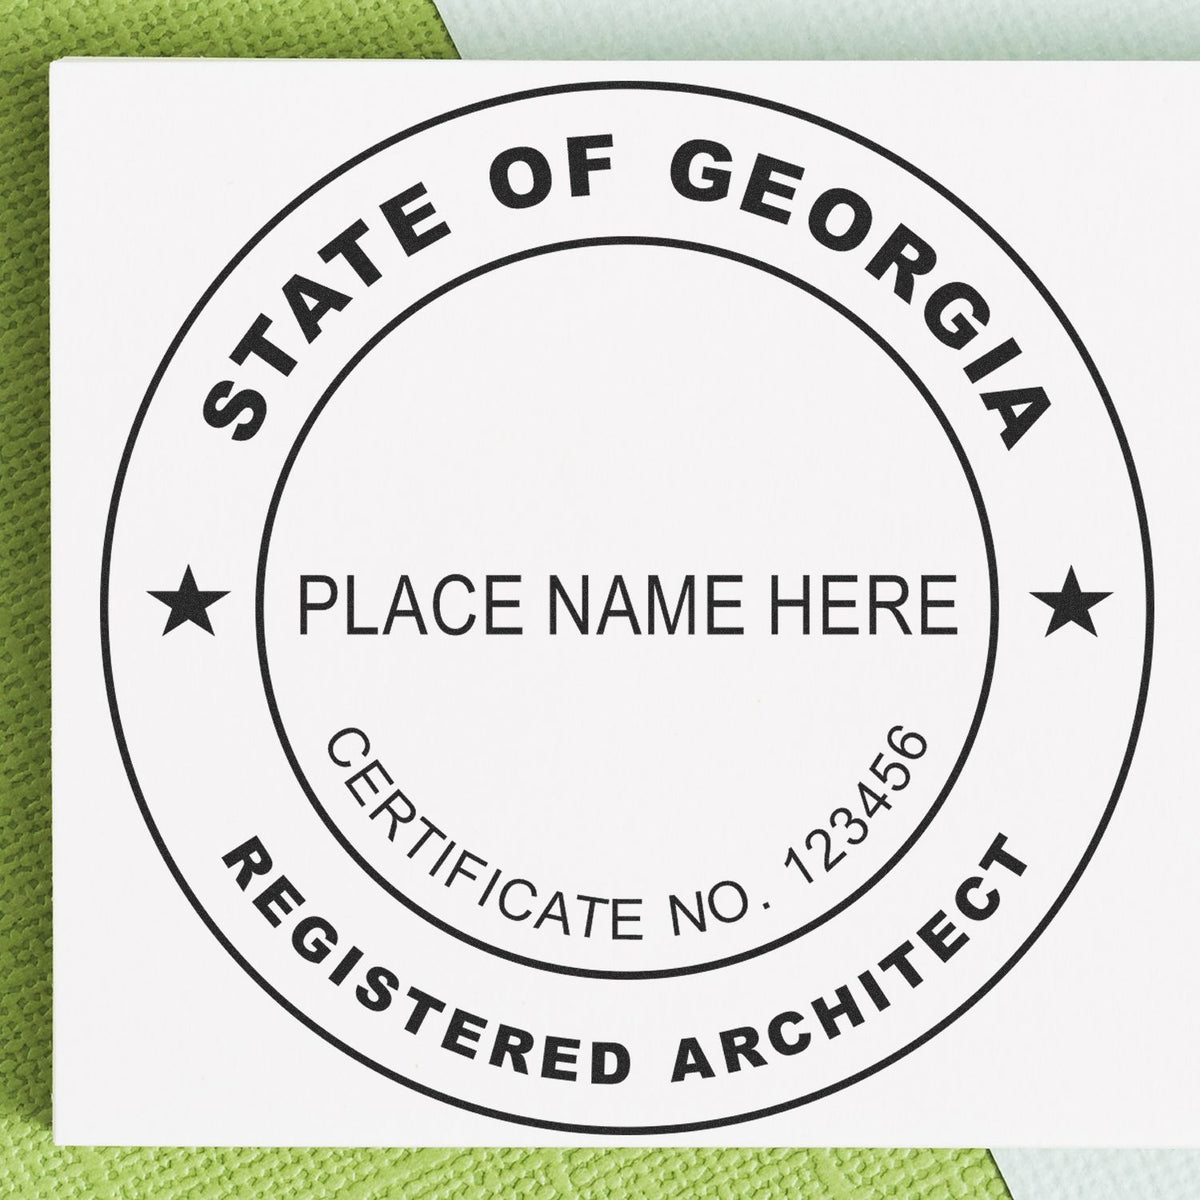 Slim Pre-Inked Georgia Architect Seal Stamp in use photo showing a stamped imprint of the Slim Pre-Inked Georgia Architect Seal Stamp